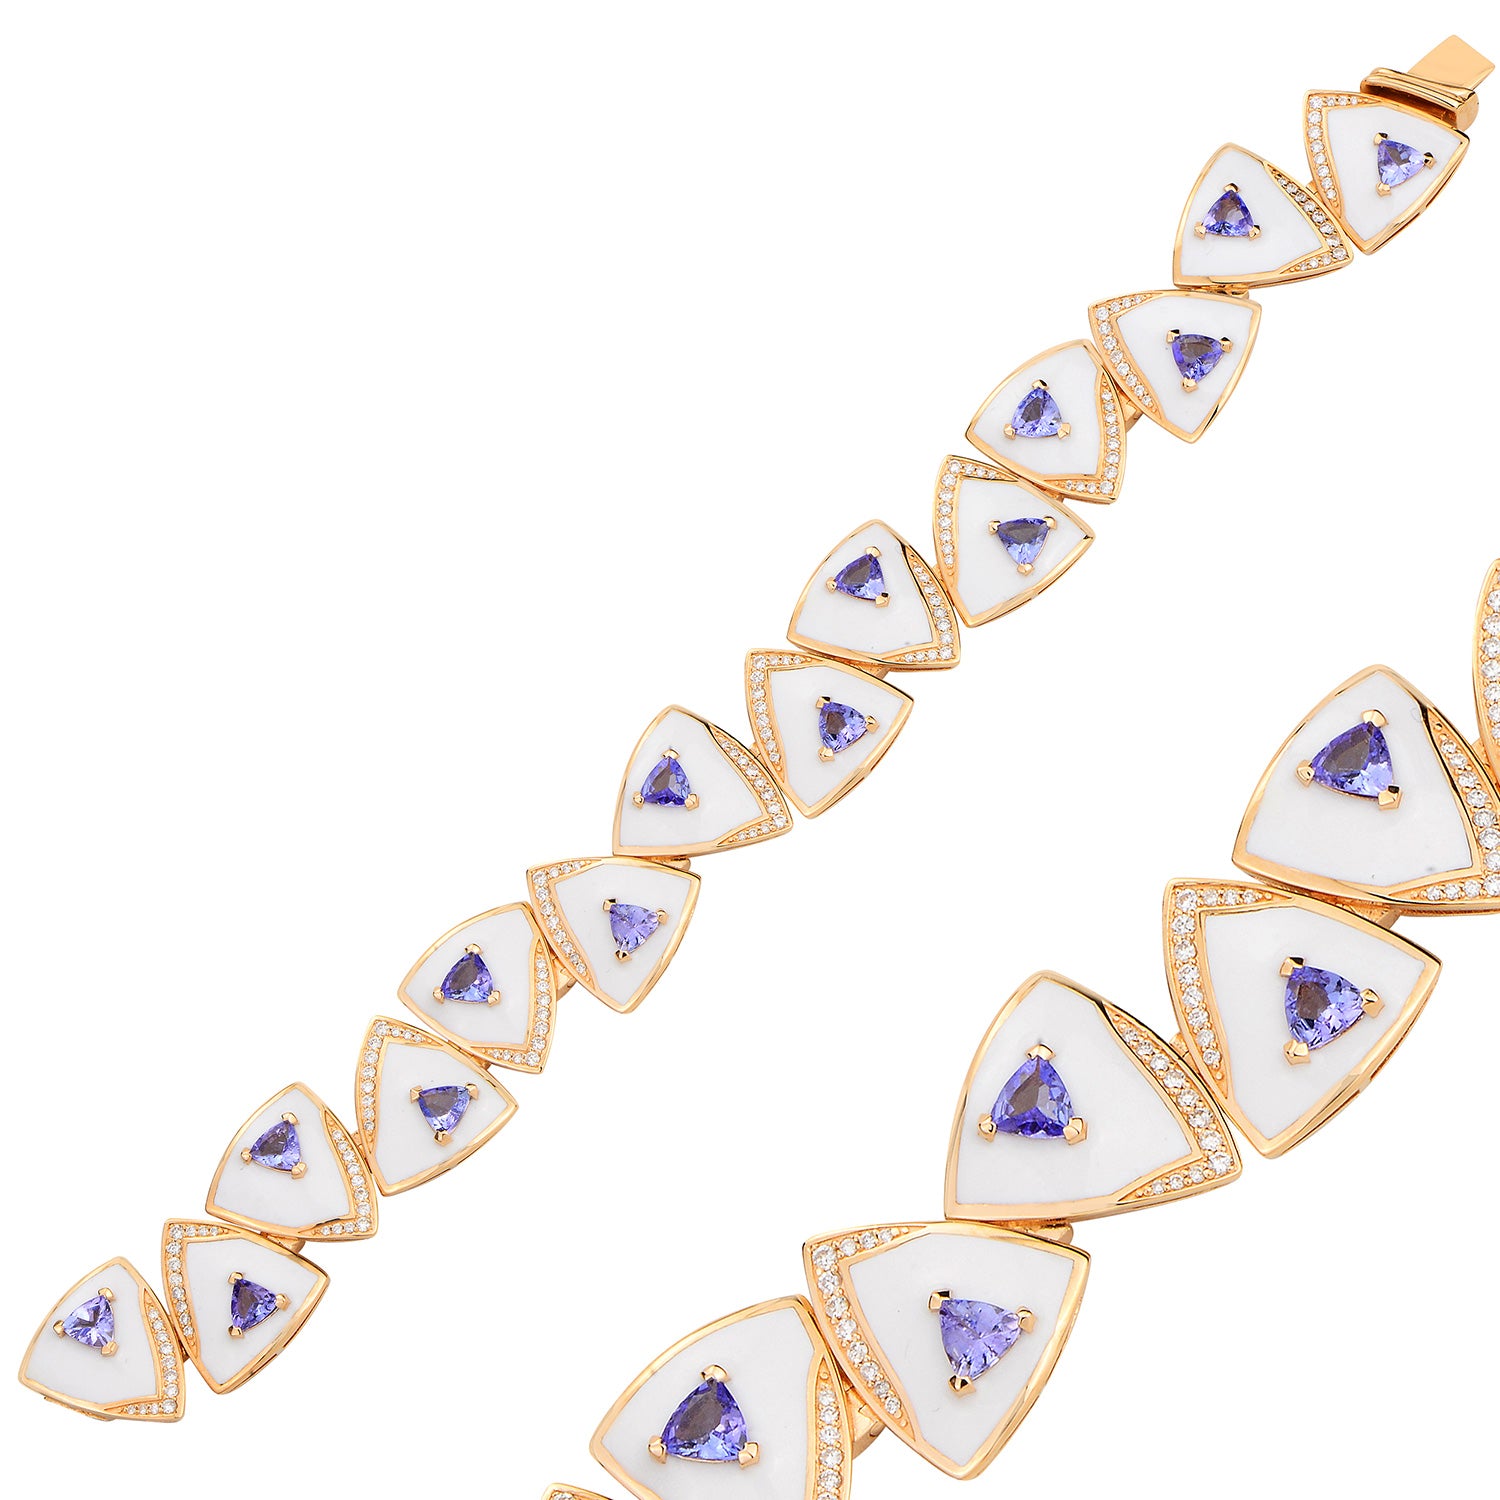 Alis Limited Edition Bracelet with Tanzanite